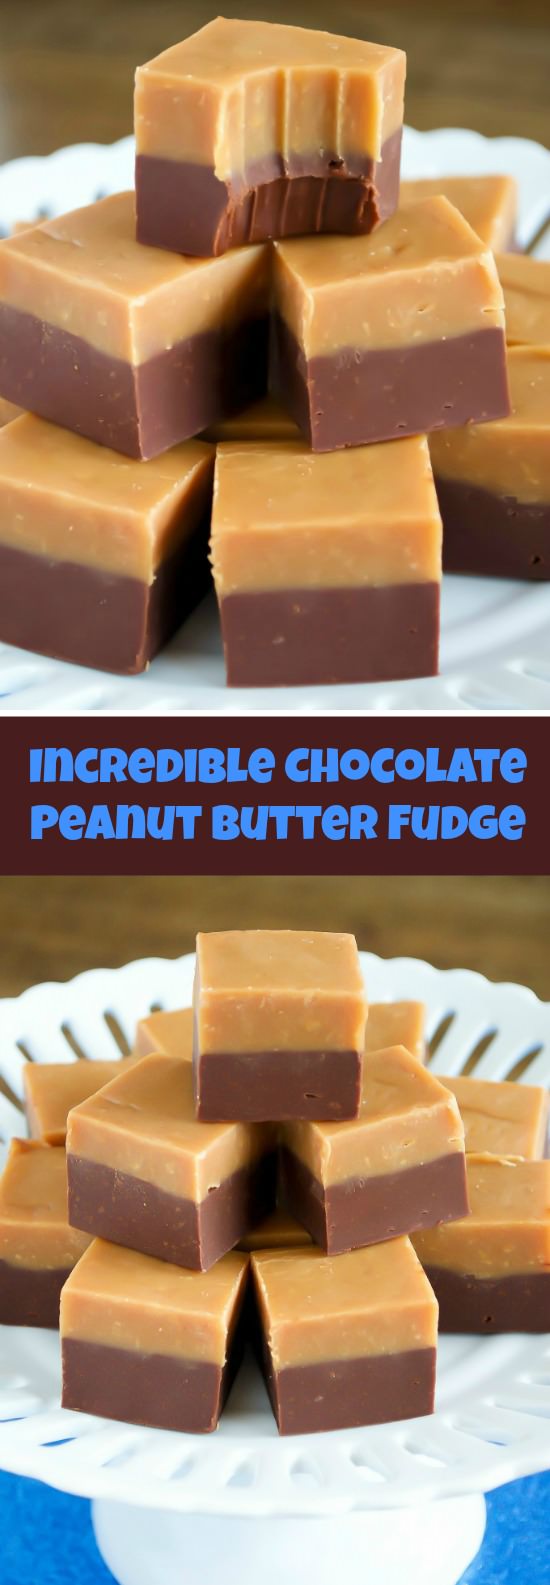 Incredible Chocolate Peanut Butter Fudge ⋆ Food Curation